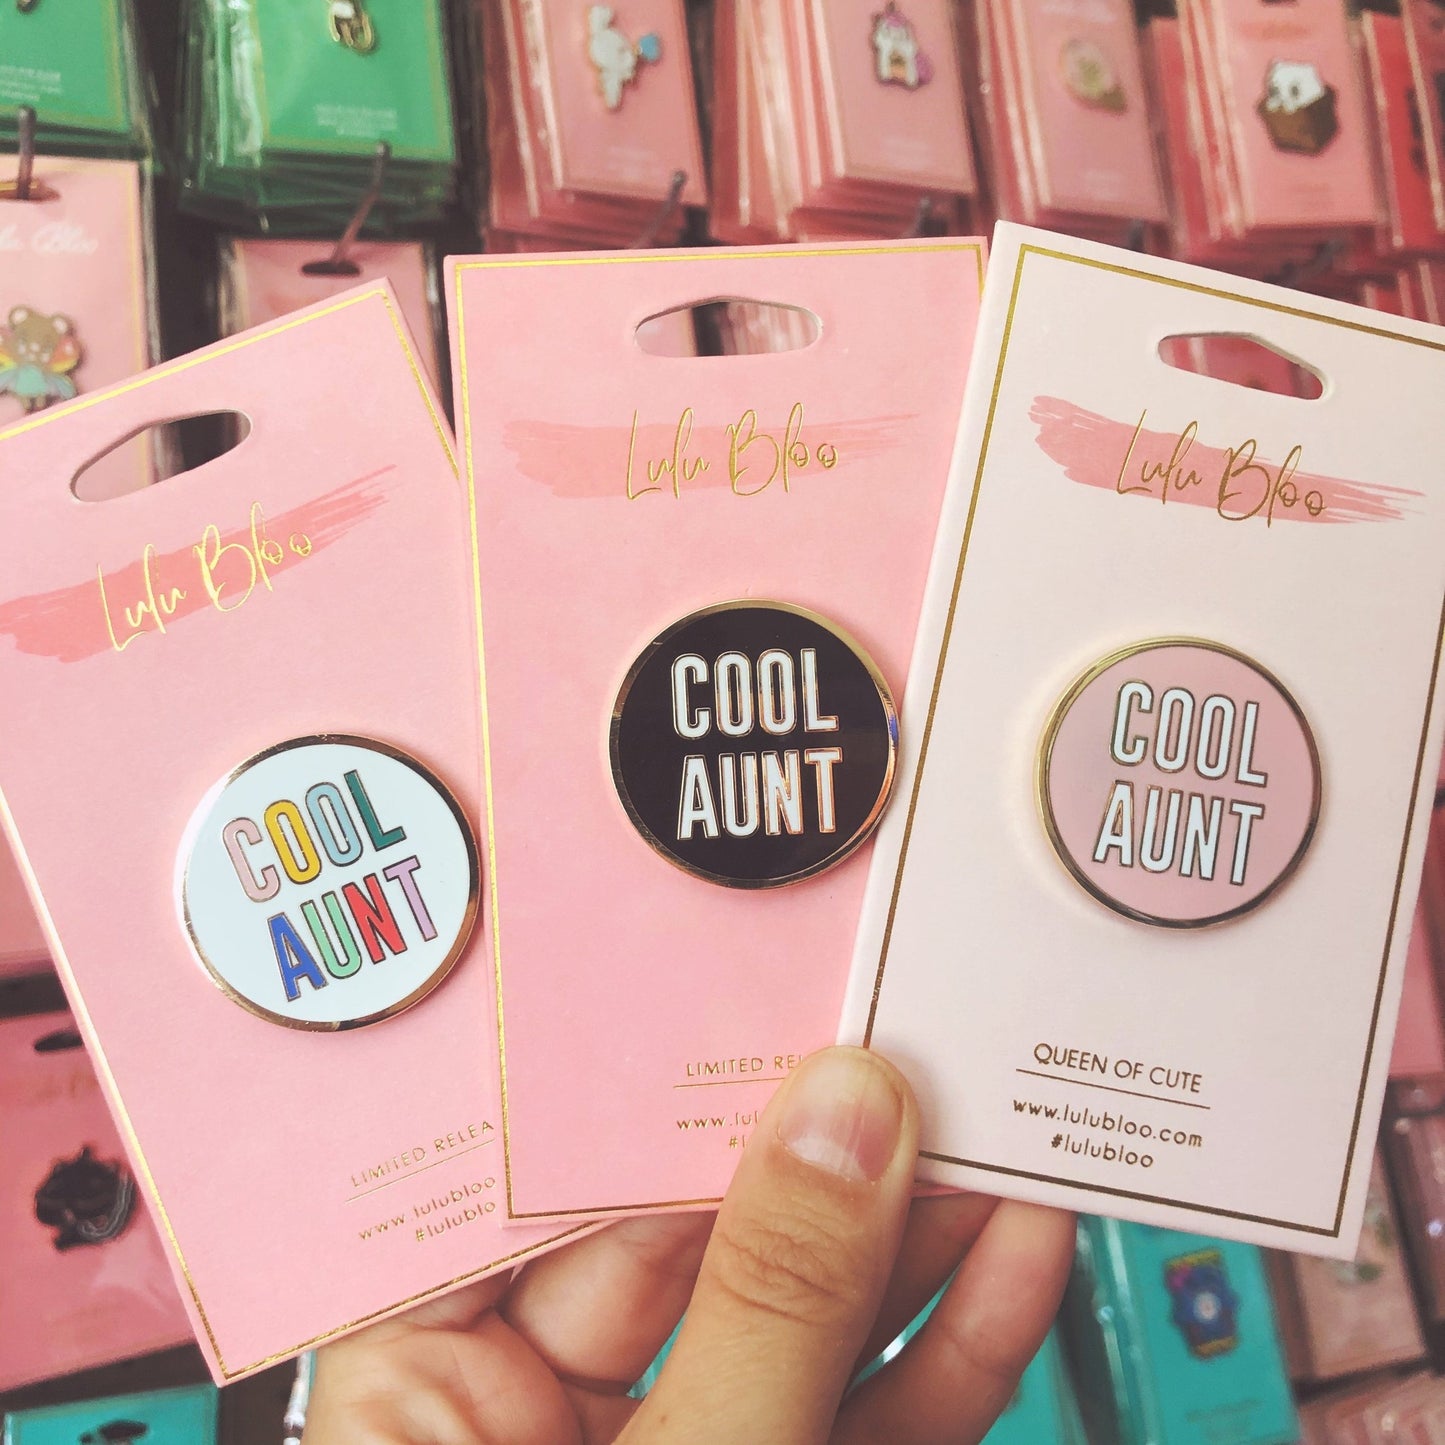 Cool Aunt Brass Lapel Pin in Black or Pink